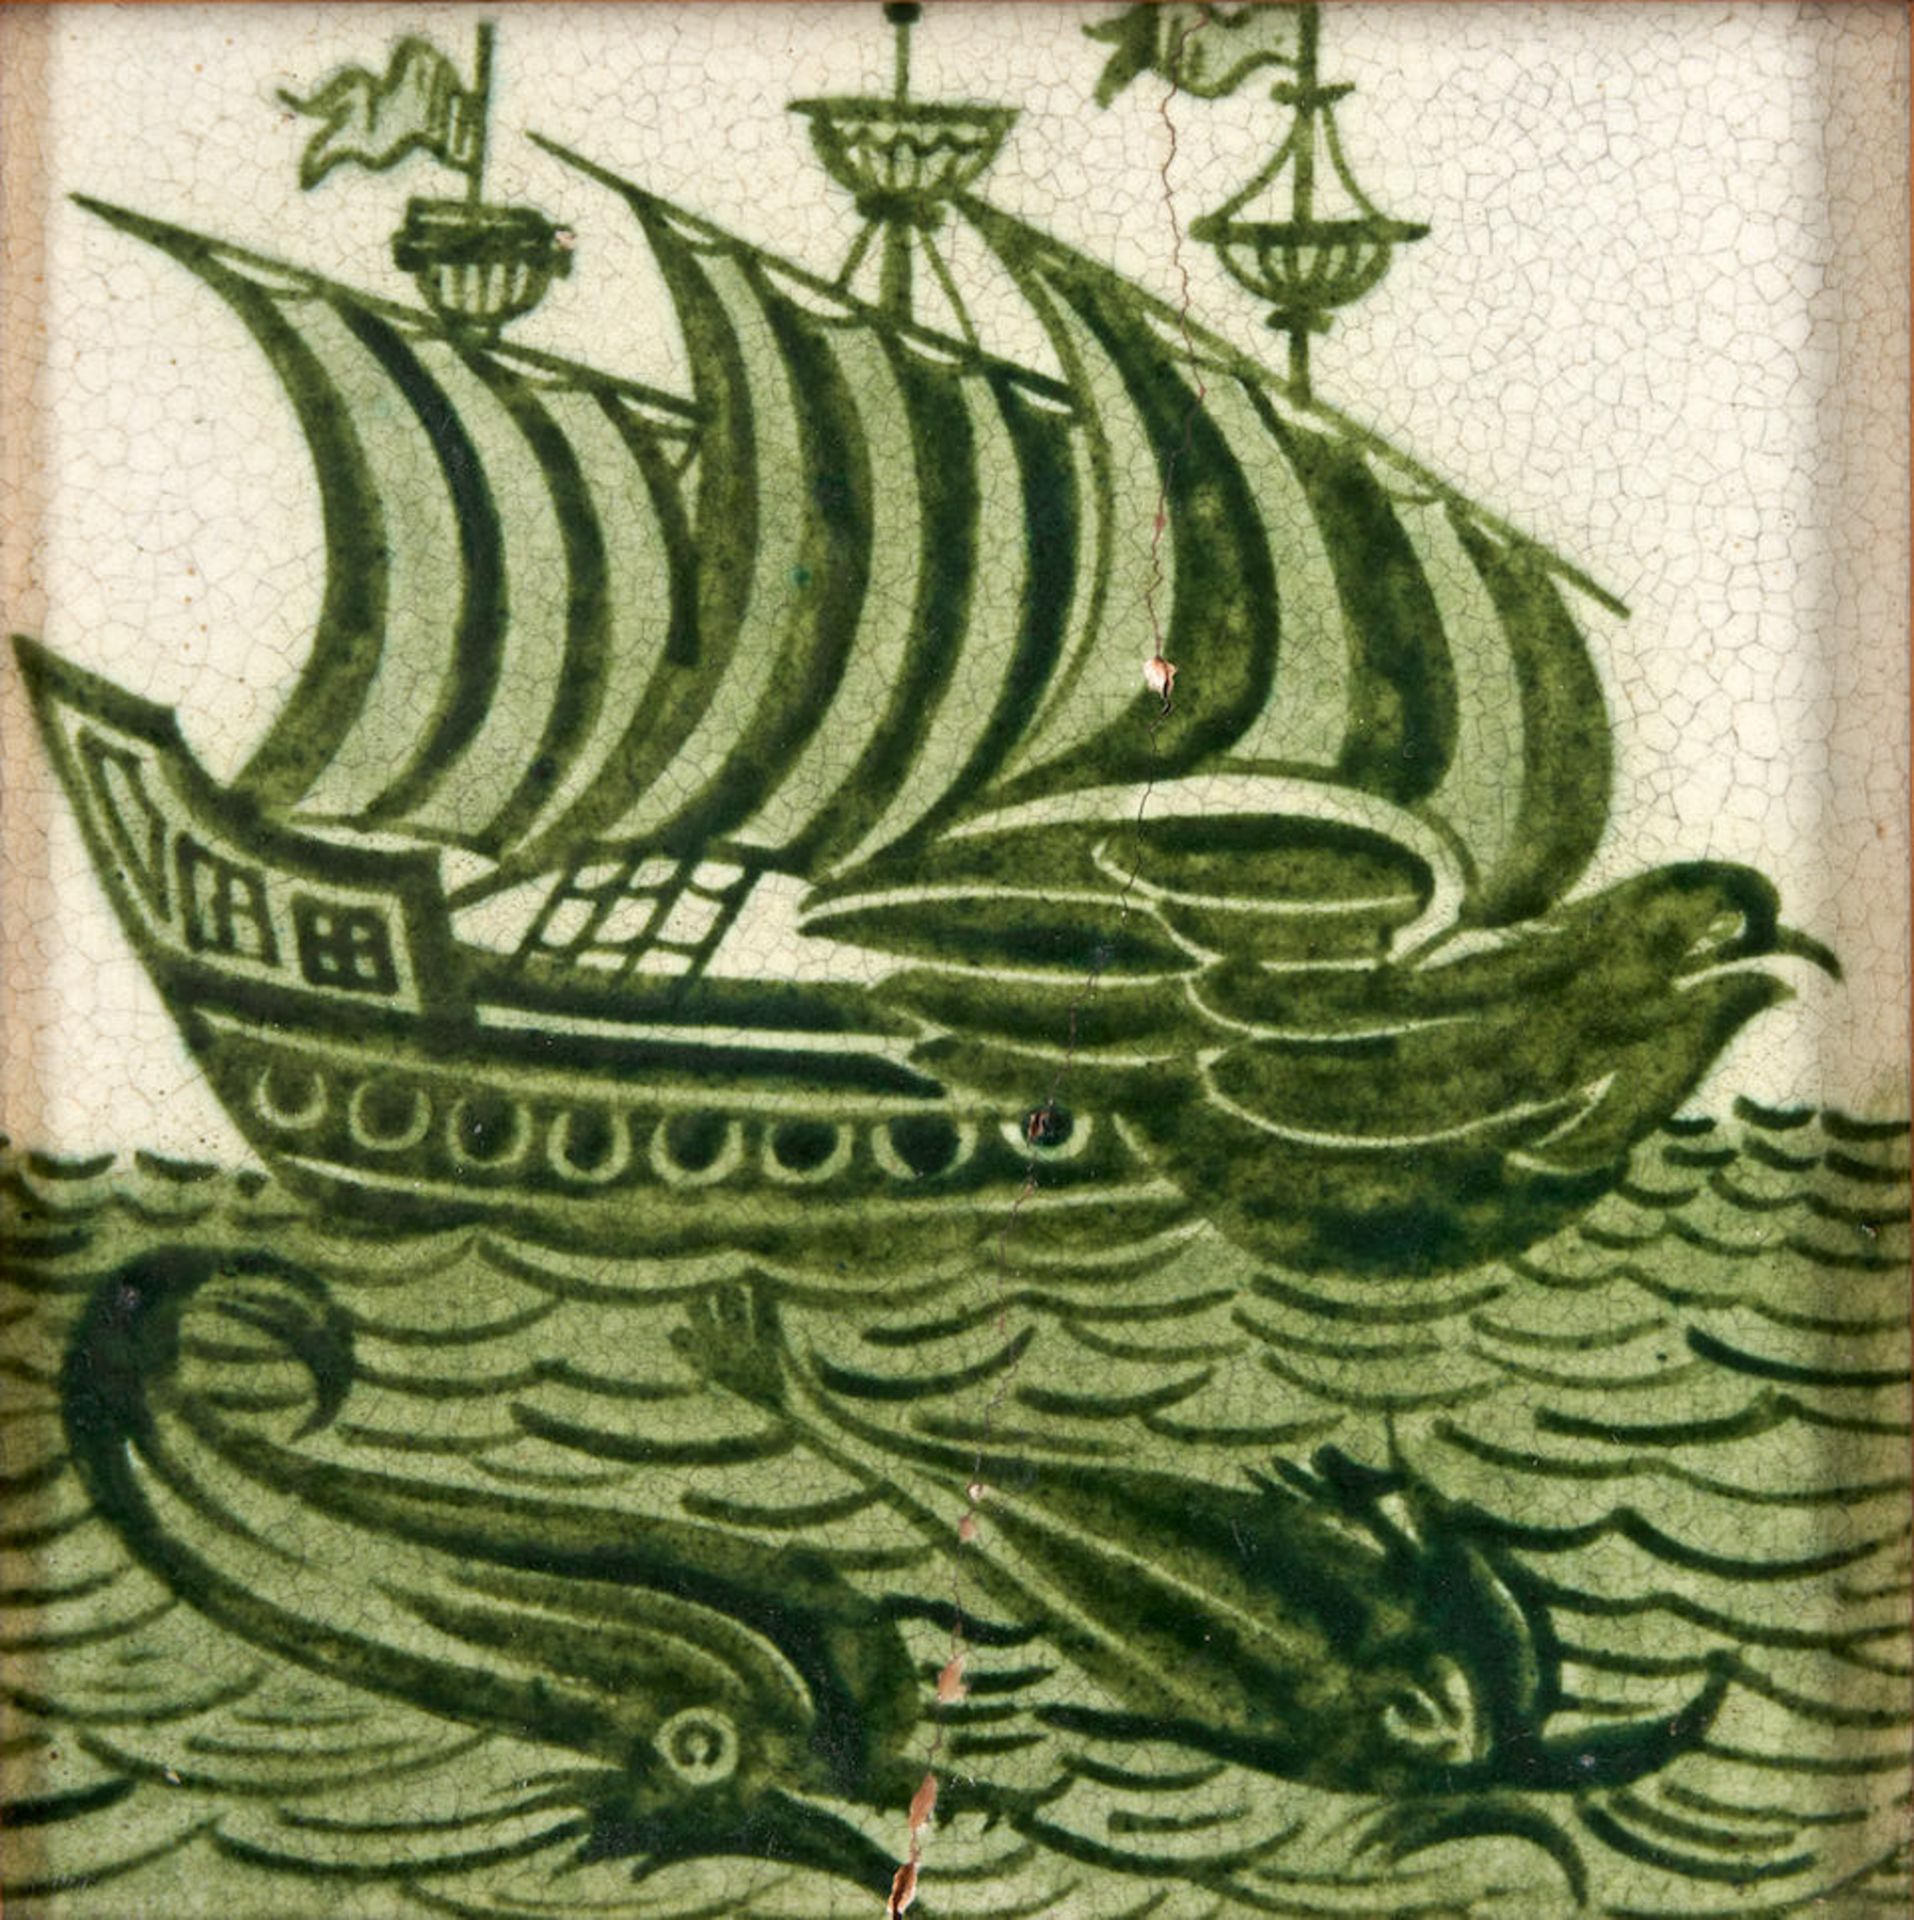 TWO WILLIAM DE MORGAN 'GALLEON' GREEN GLAZED TILES, England, late 19th century, both with impres... - Image 3 of 3